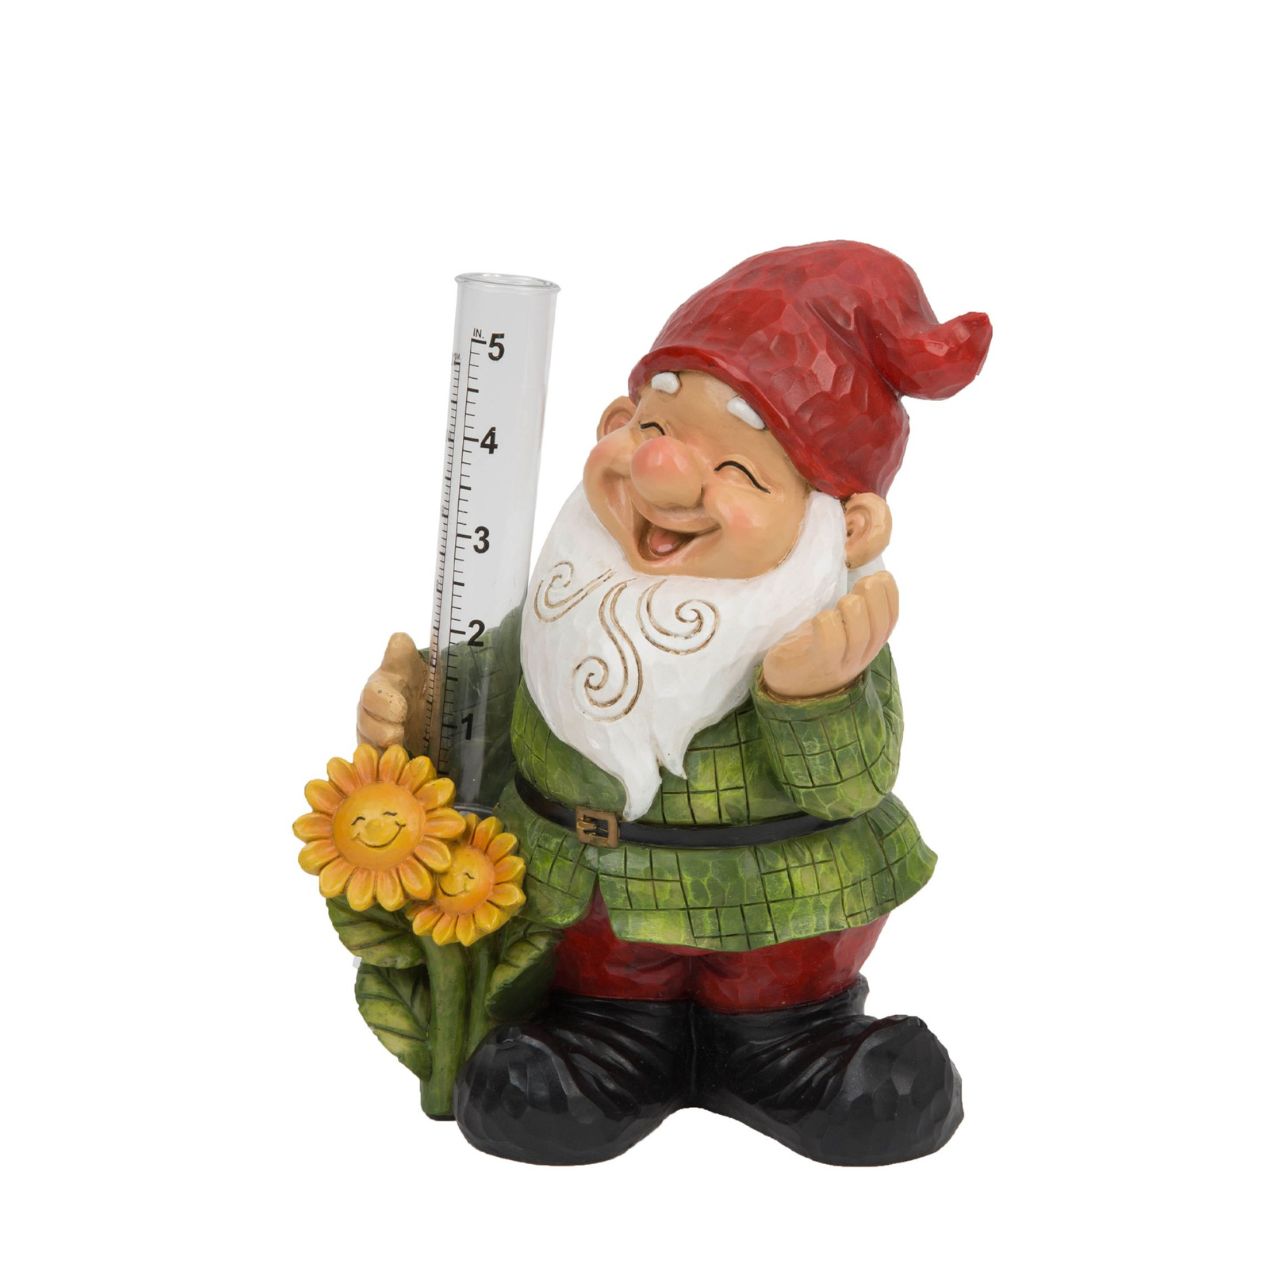 Country Living Garden Gnome With Sunflowers  Bring some rustic cheer to your outdoor living space with this charming hand painted gnome. From Country Living - bringing you closer to nature.